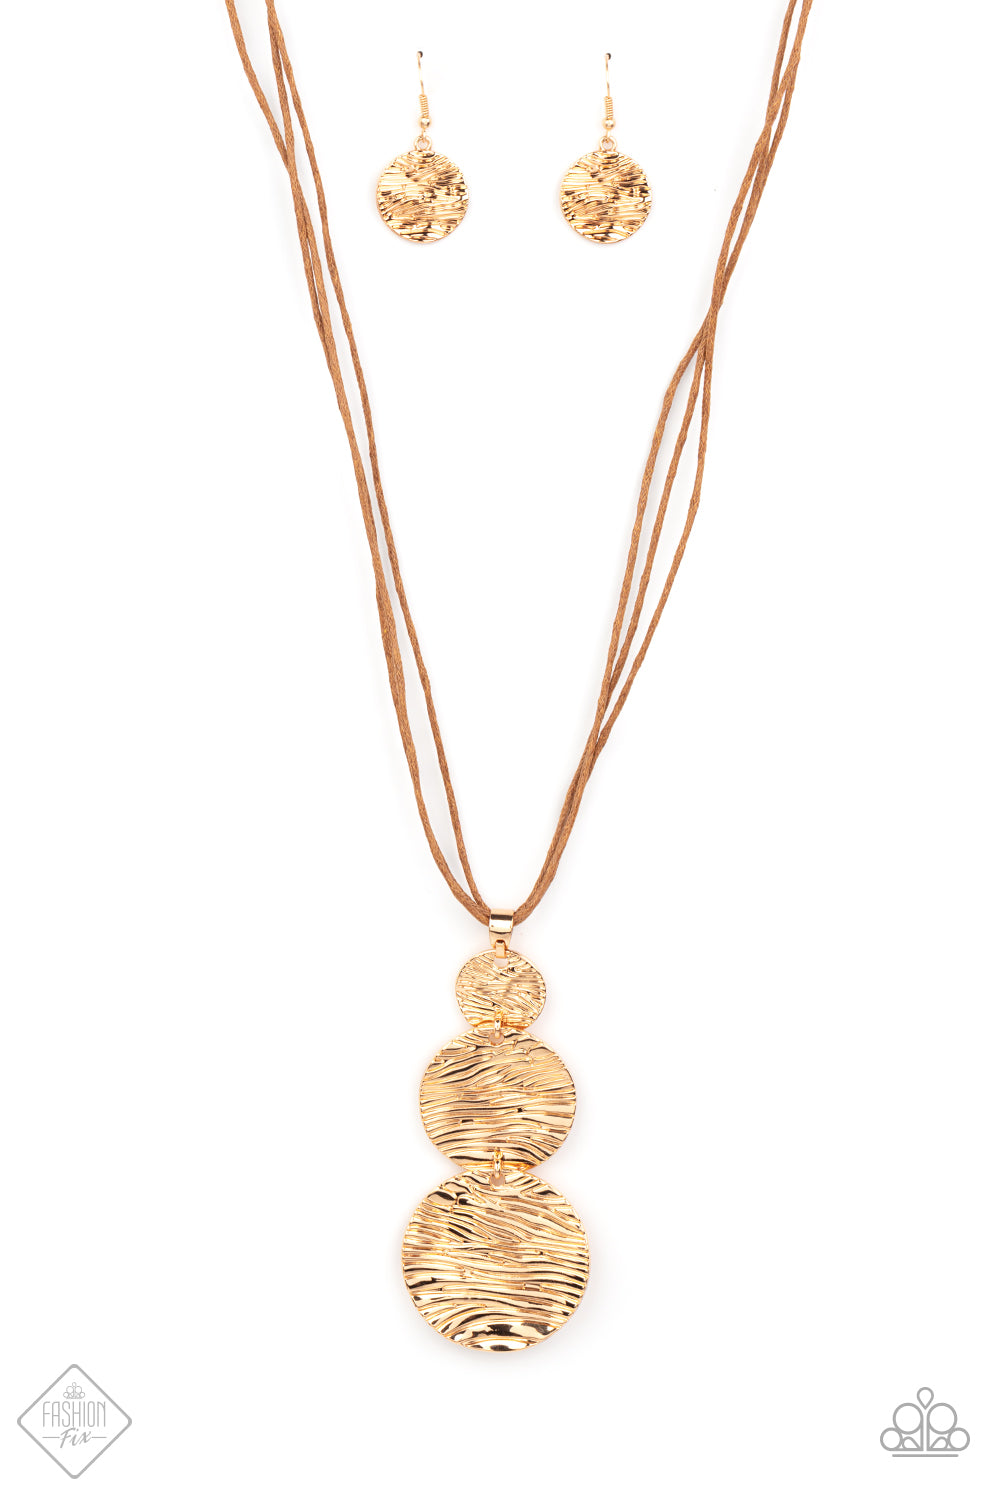 Paparazzi Circulating Shimmer Gold Long Necklace - Fashion Fix Sunset Sightings September 2021